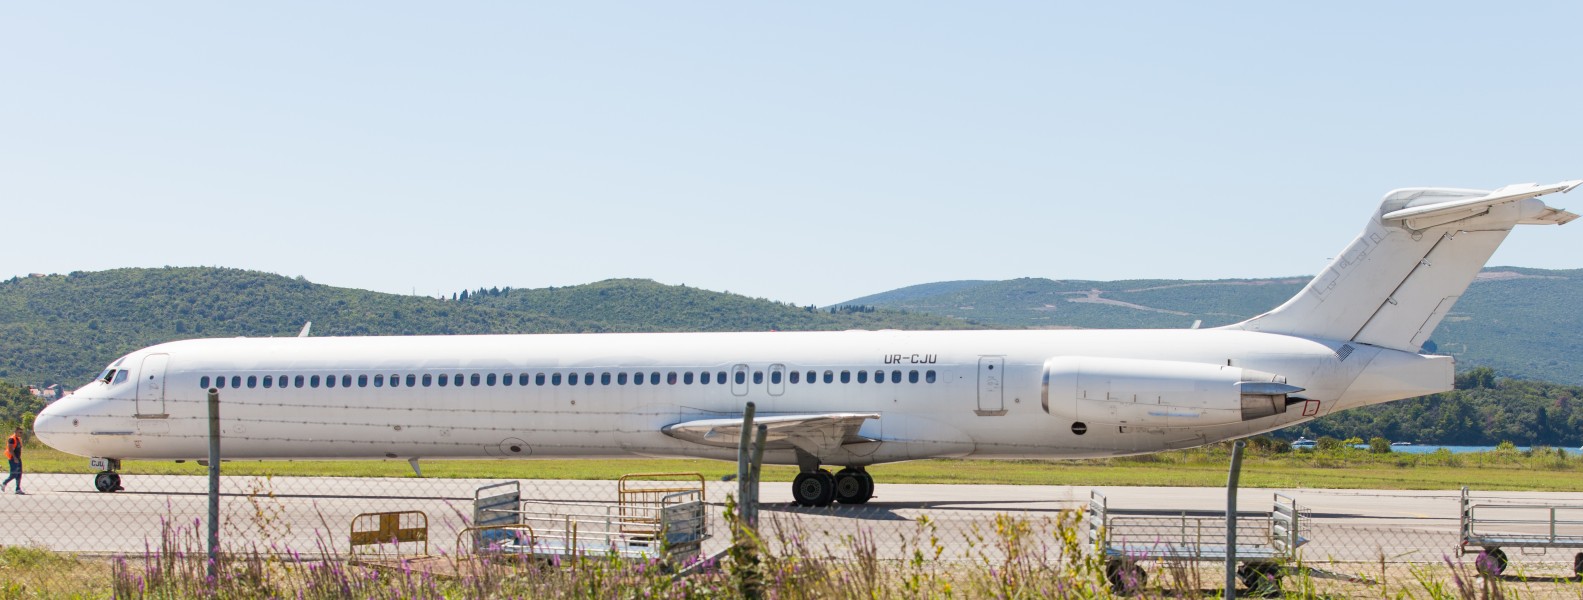 an airplane photographed in Tivat, Montenegro in August 2014, picture 5